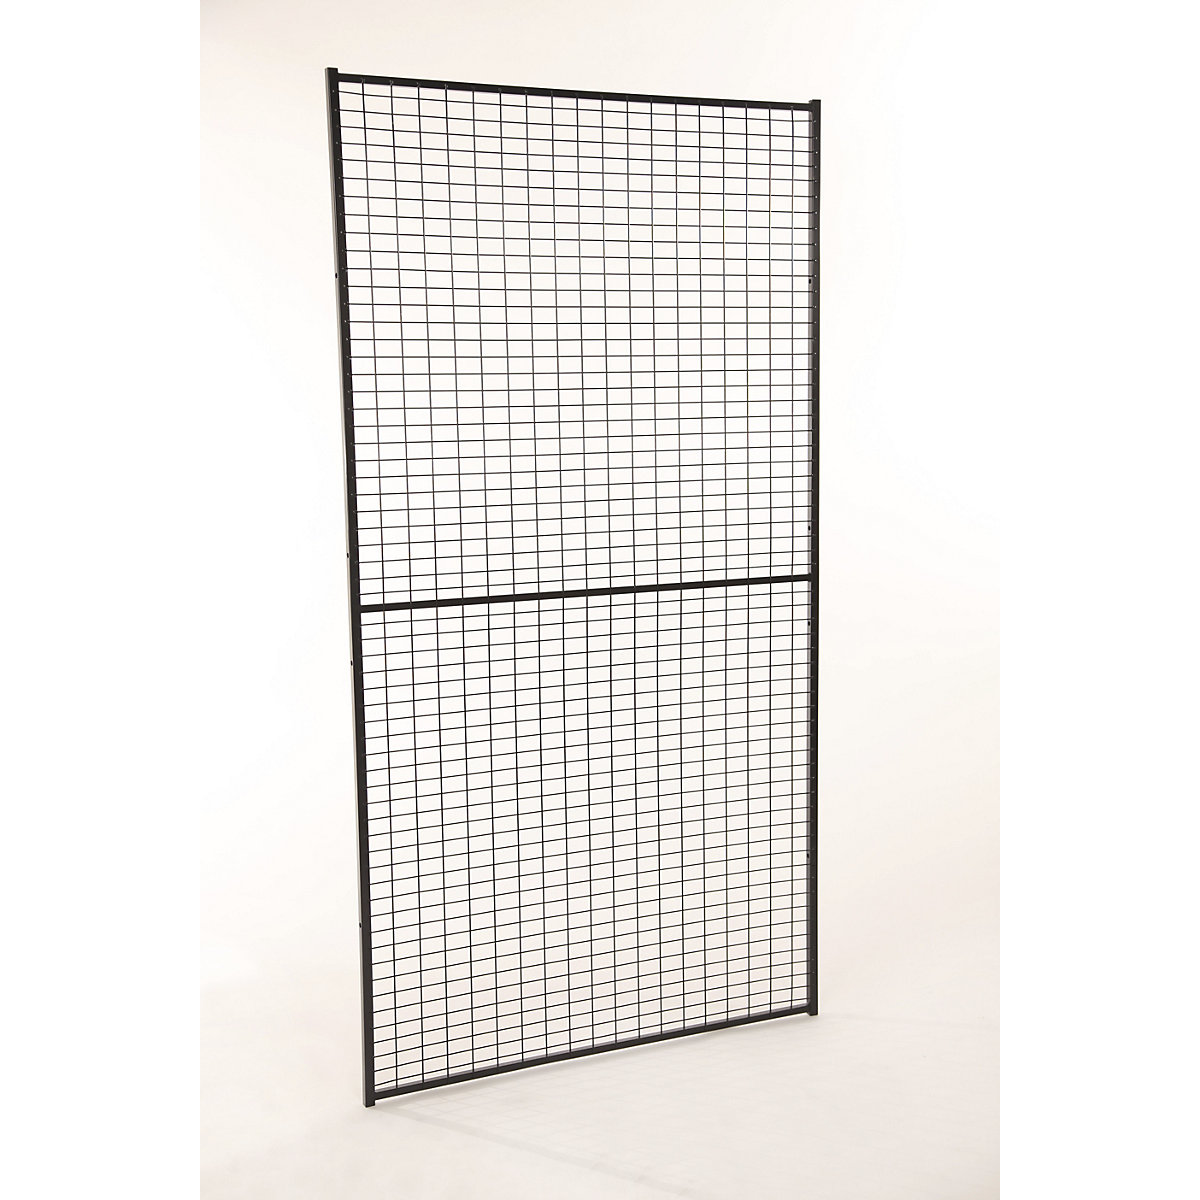 X-GUARD LITE machine protective fencing, wall section – Axelent, height 1900 mm, width 800 mm-12